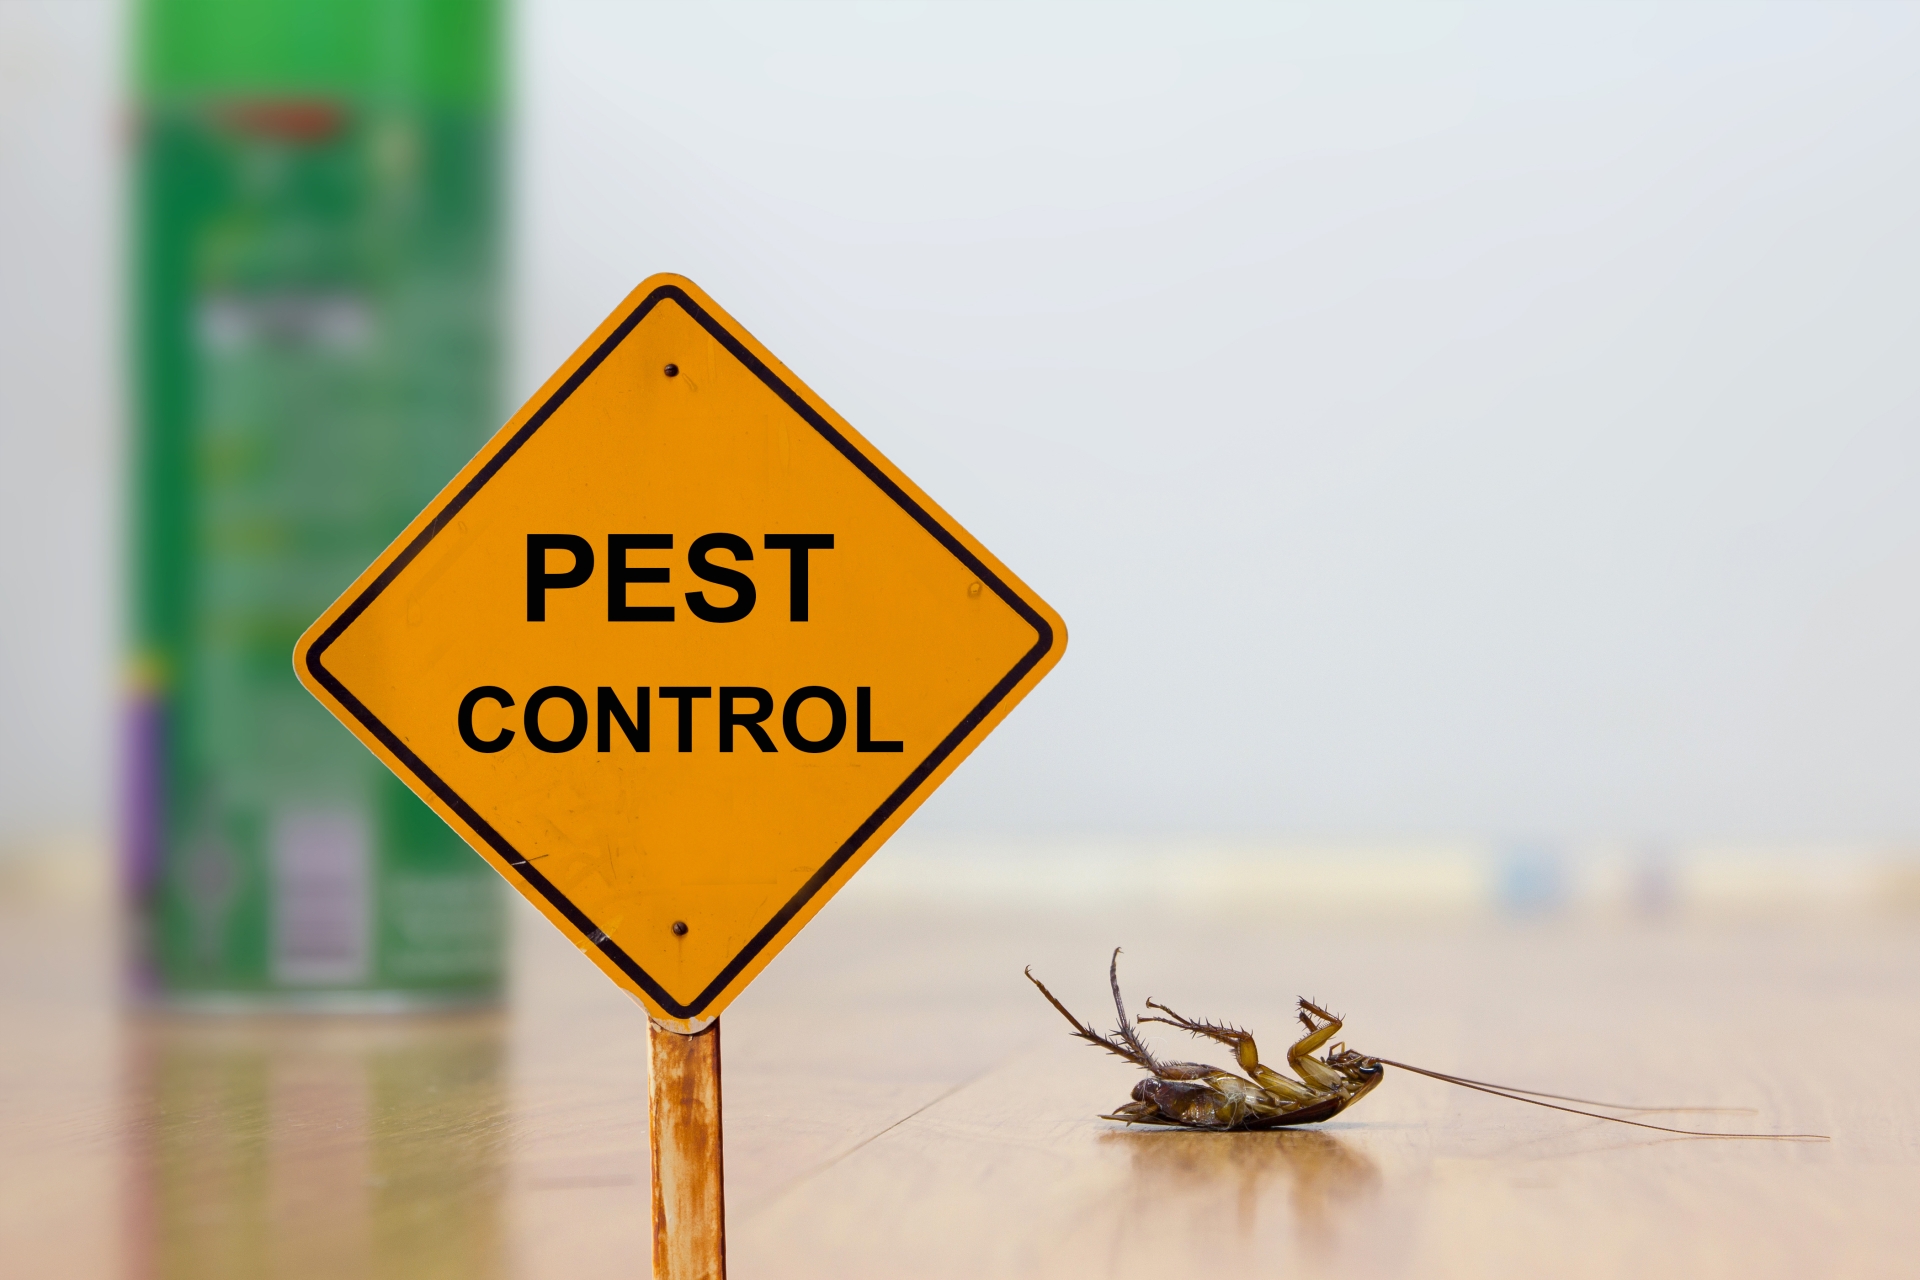 24 Hour Pest Control, Pest Control in Ashtead, KT21. Call Now 020 8166 9746